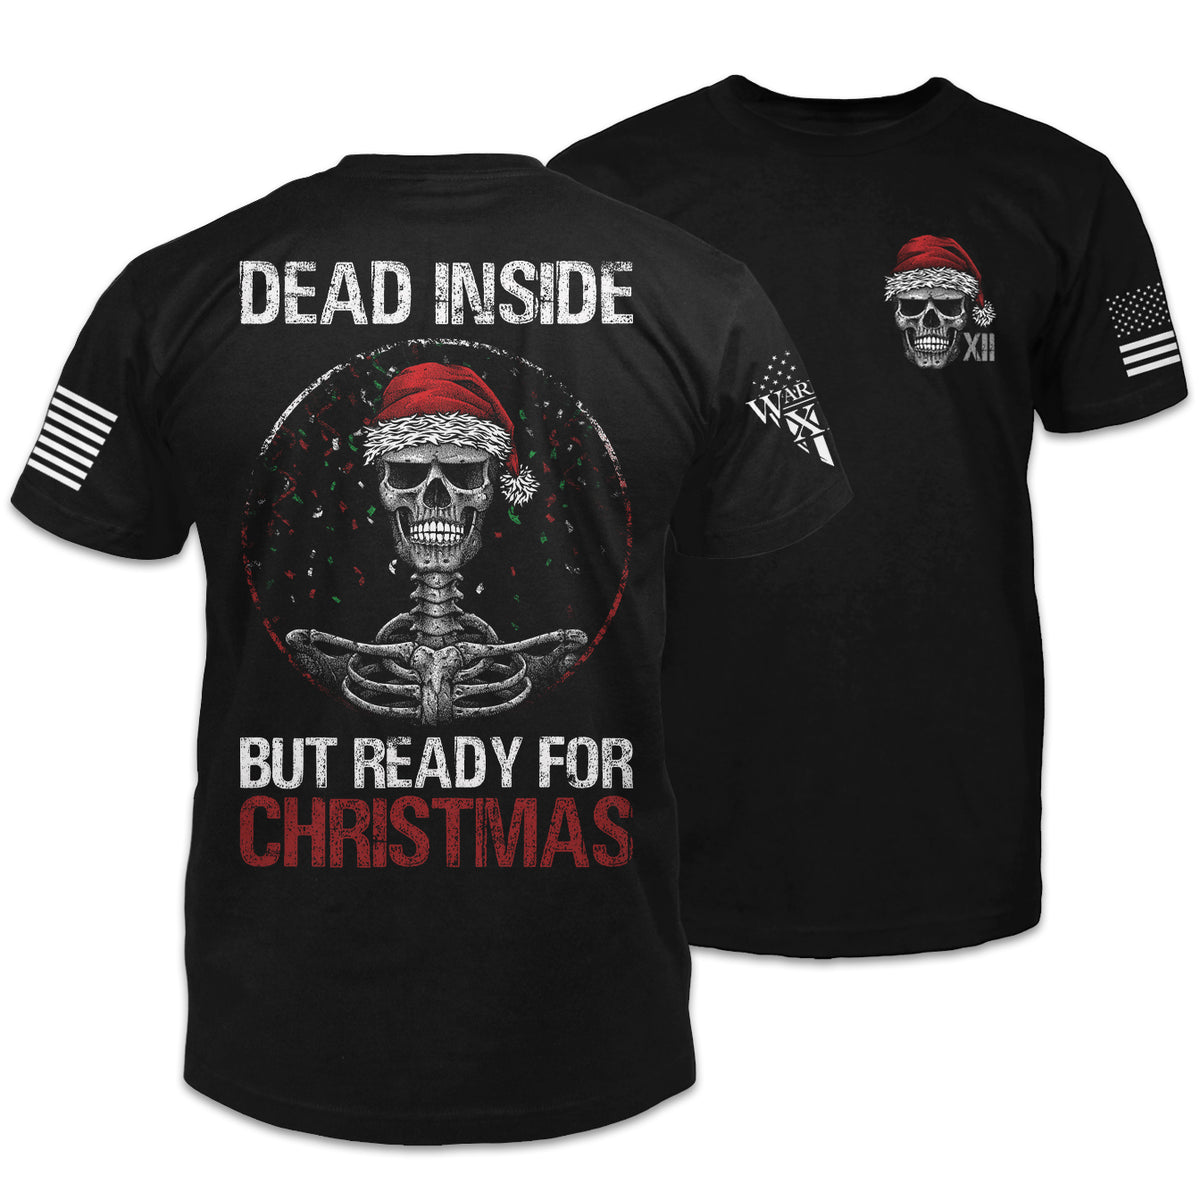 Front and back black t-shirt with the words "Dead inside but ready for Christmas" with a skeleton wearing a christmas inside a snow globe printed on the shirt.